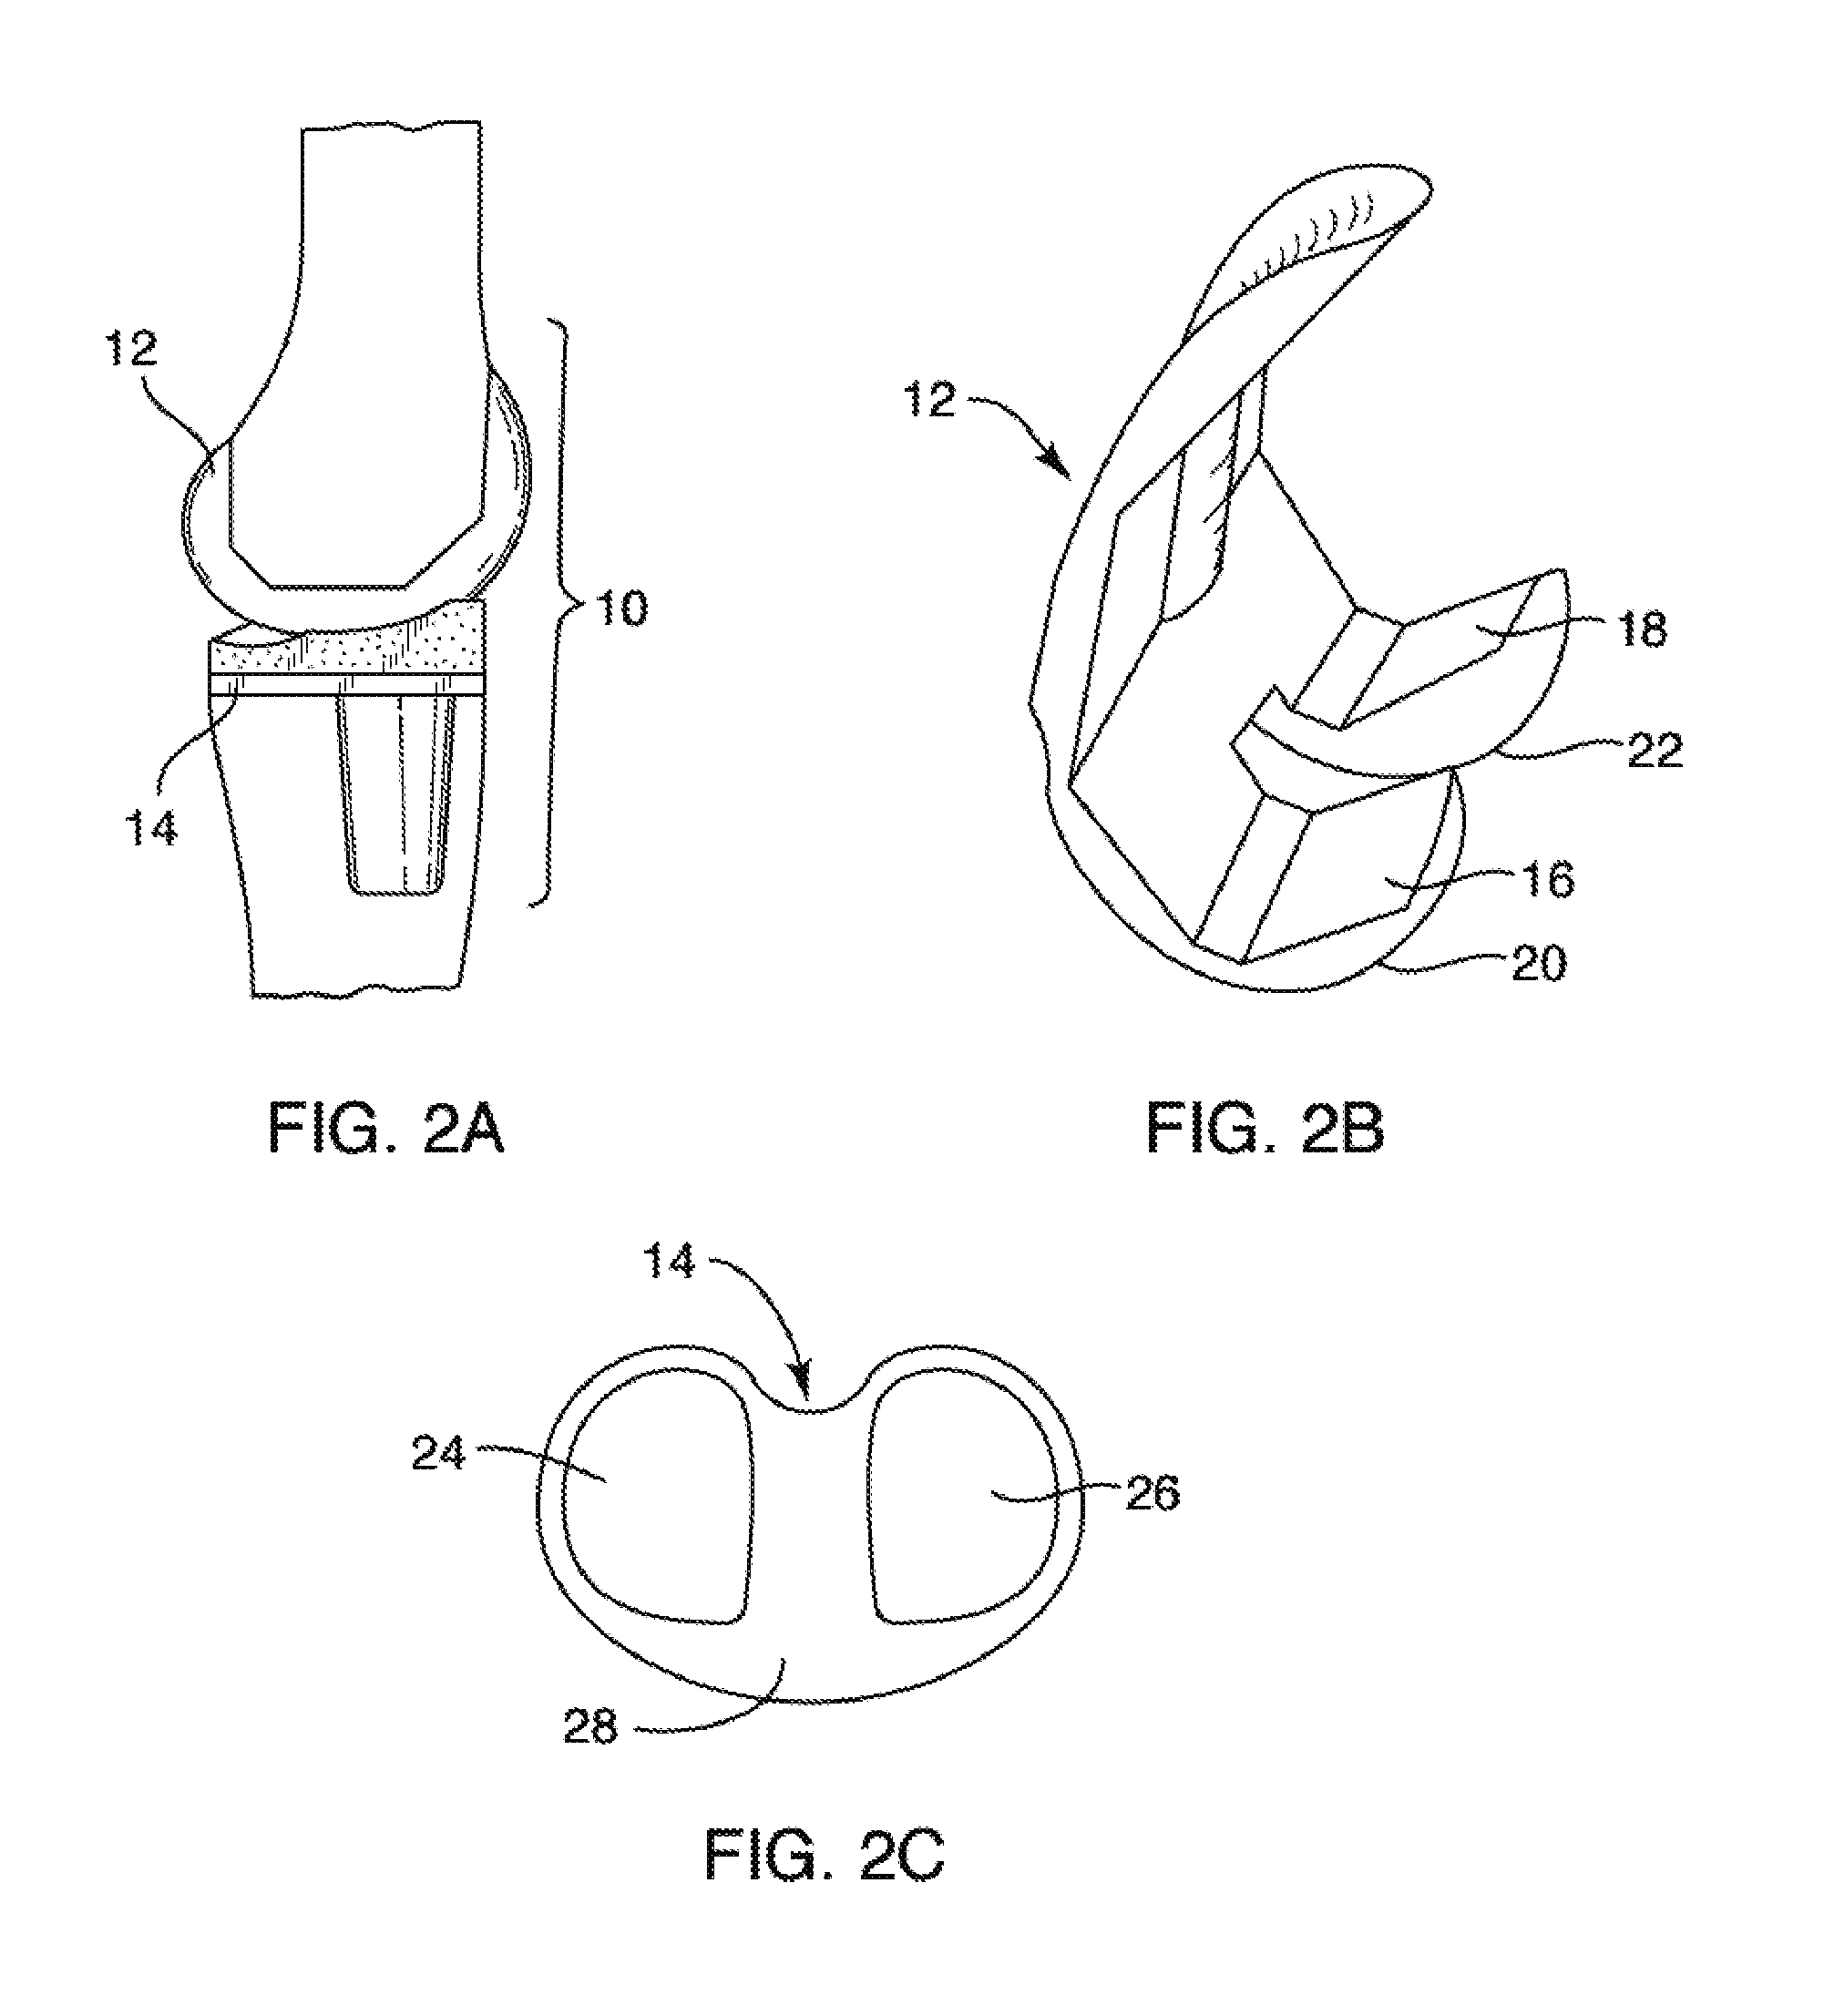 Systems and methods for providing prosthetic components